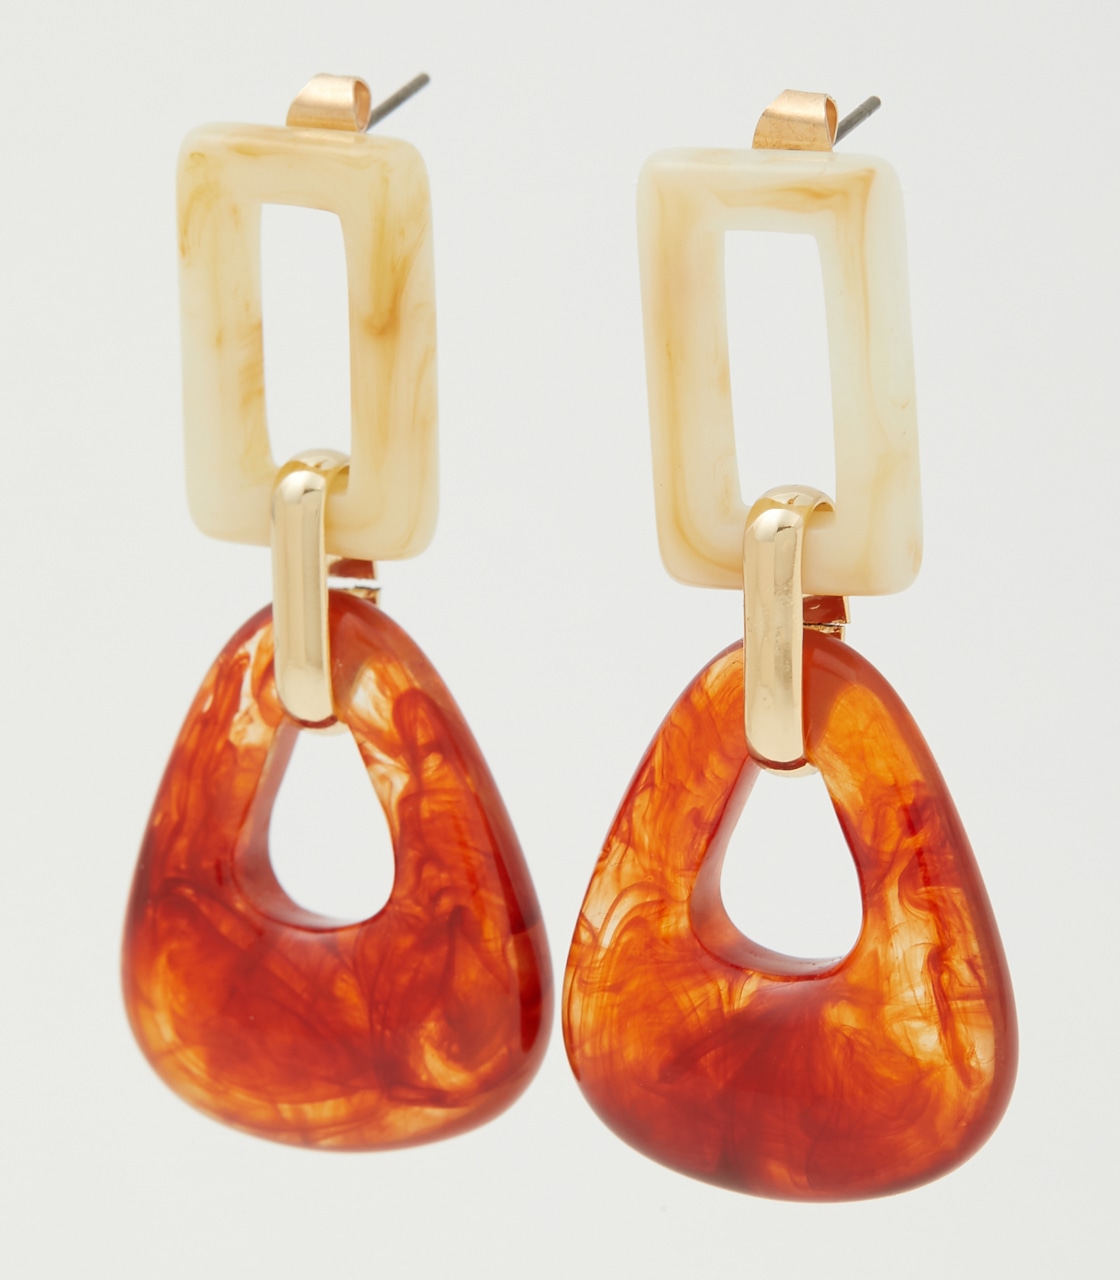 BICOLOR MARBLE EARRINGS/バイカラーマーブルピアス 詳細画像 柄ORG 2